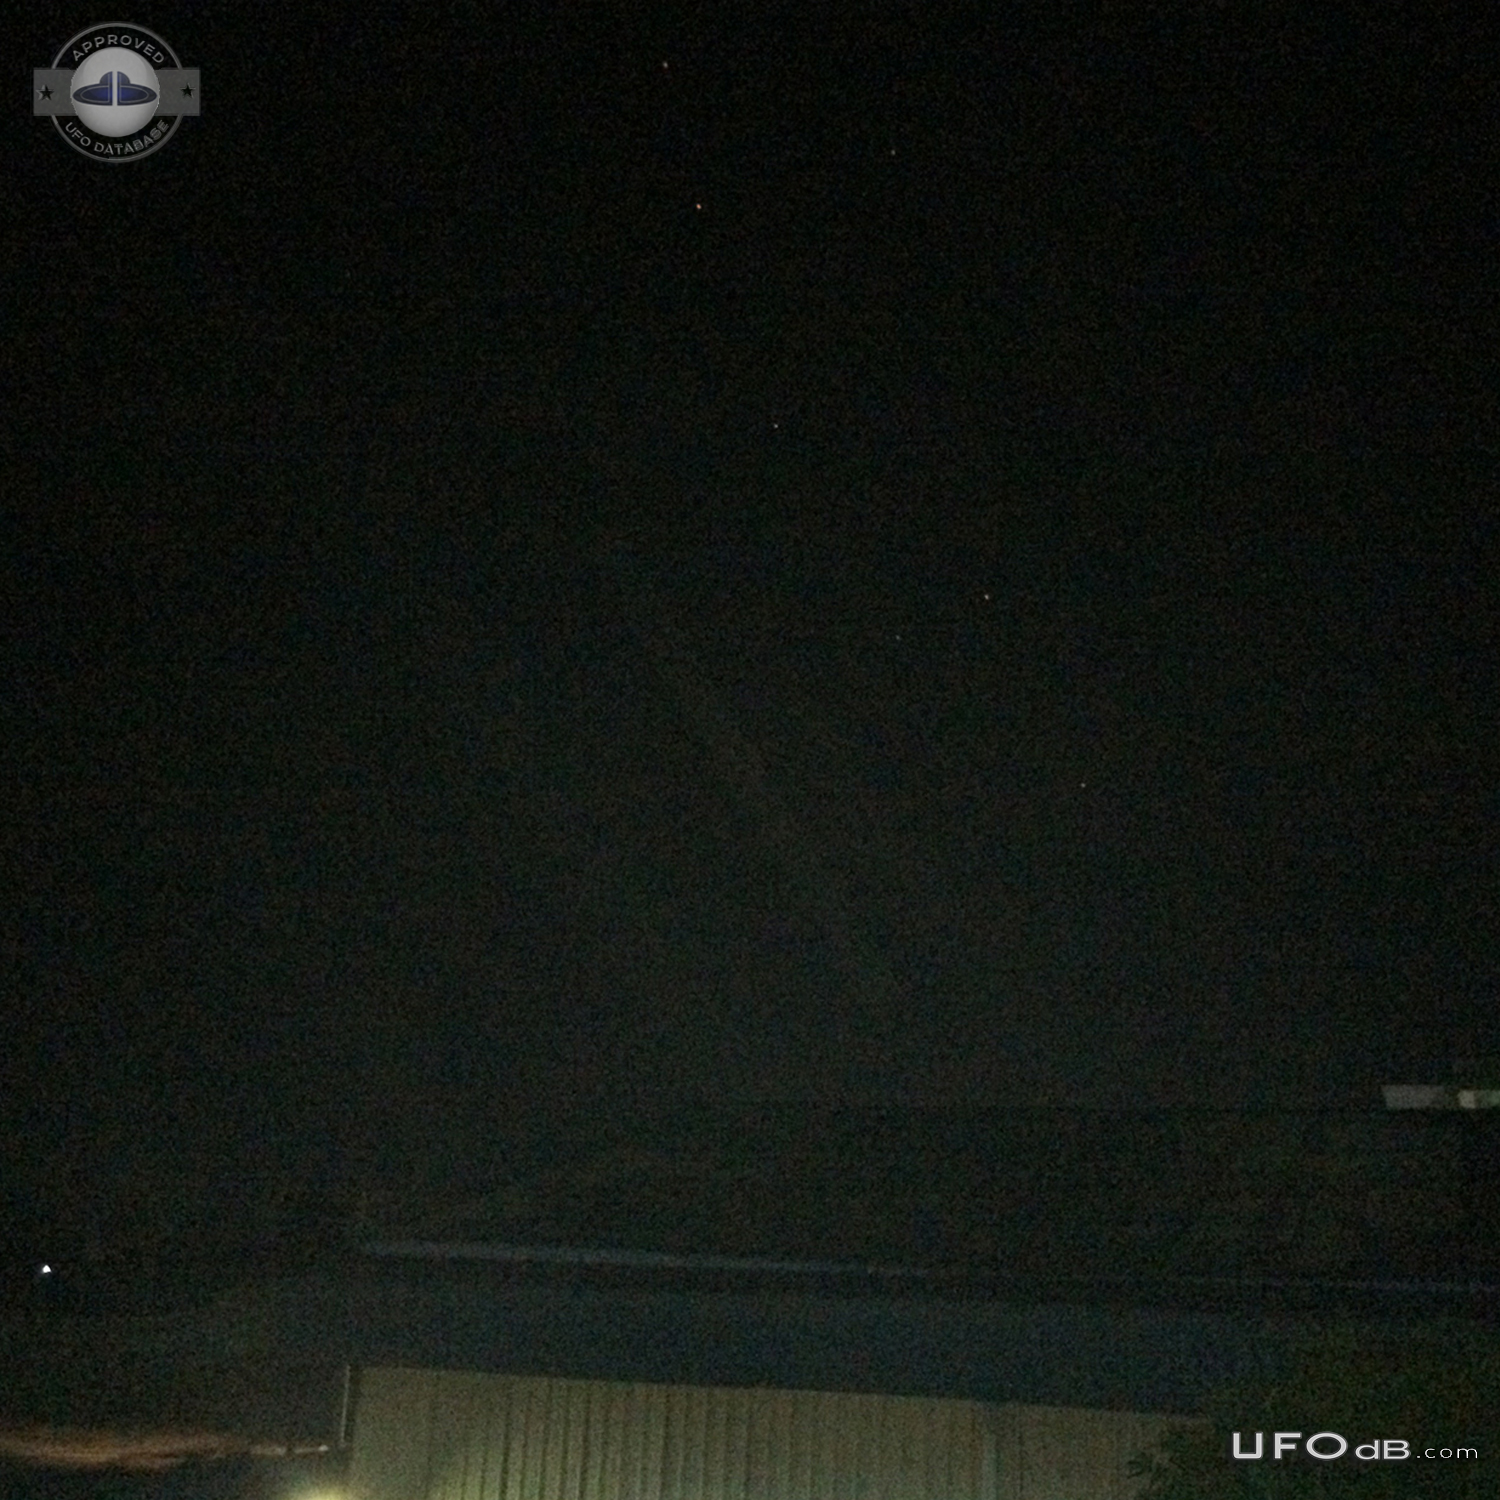 7 red star like UFO ascended above cloud - Cambodia 2015 UFO Picture #676-1